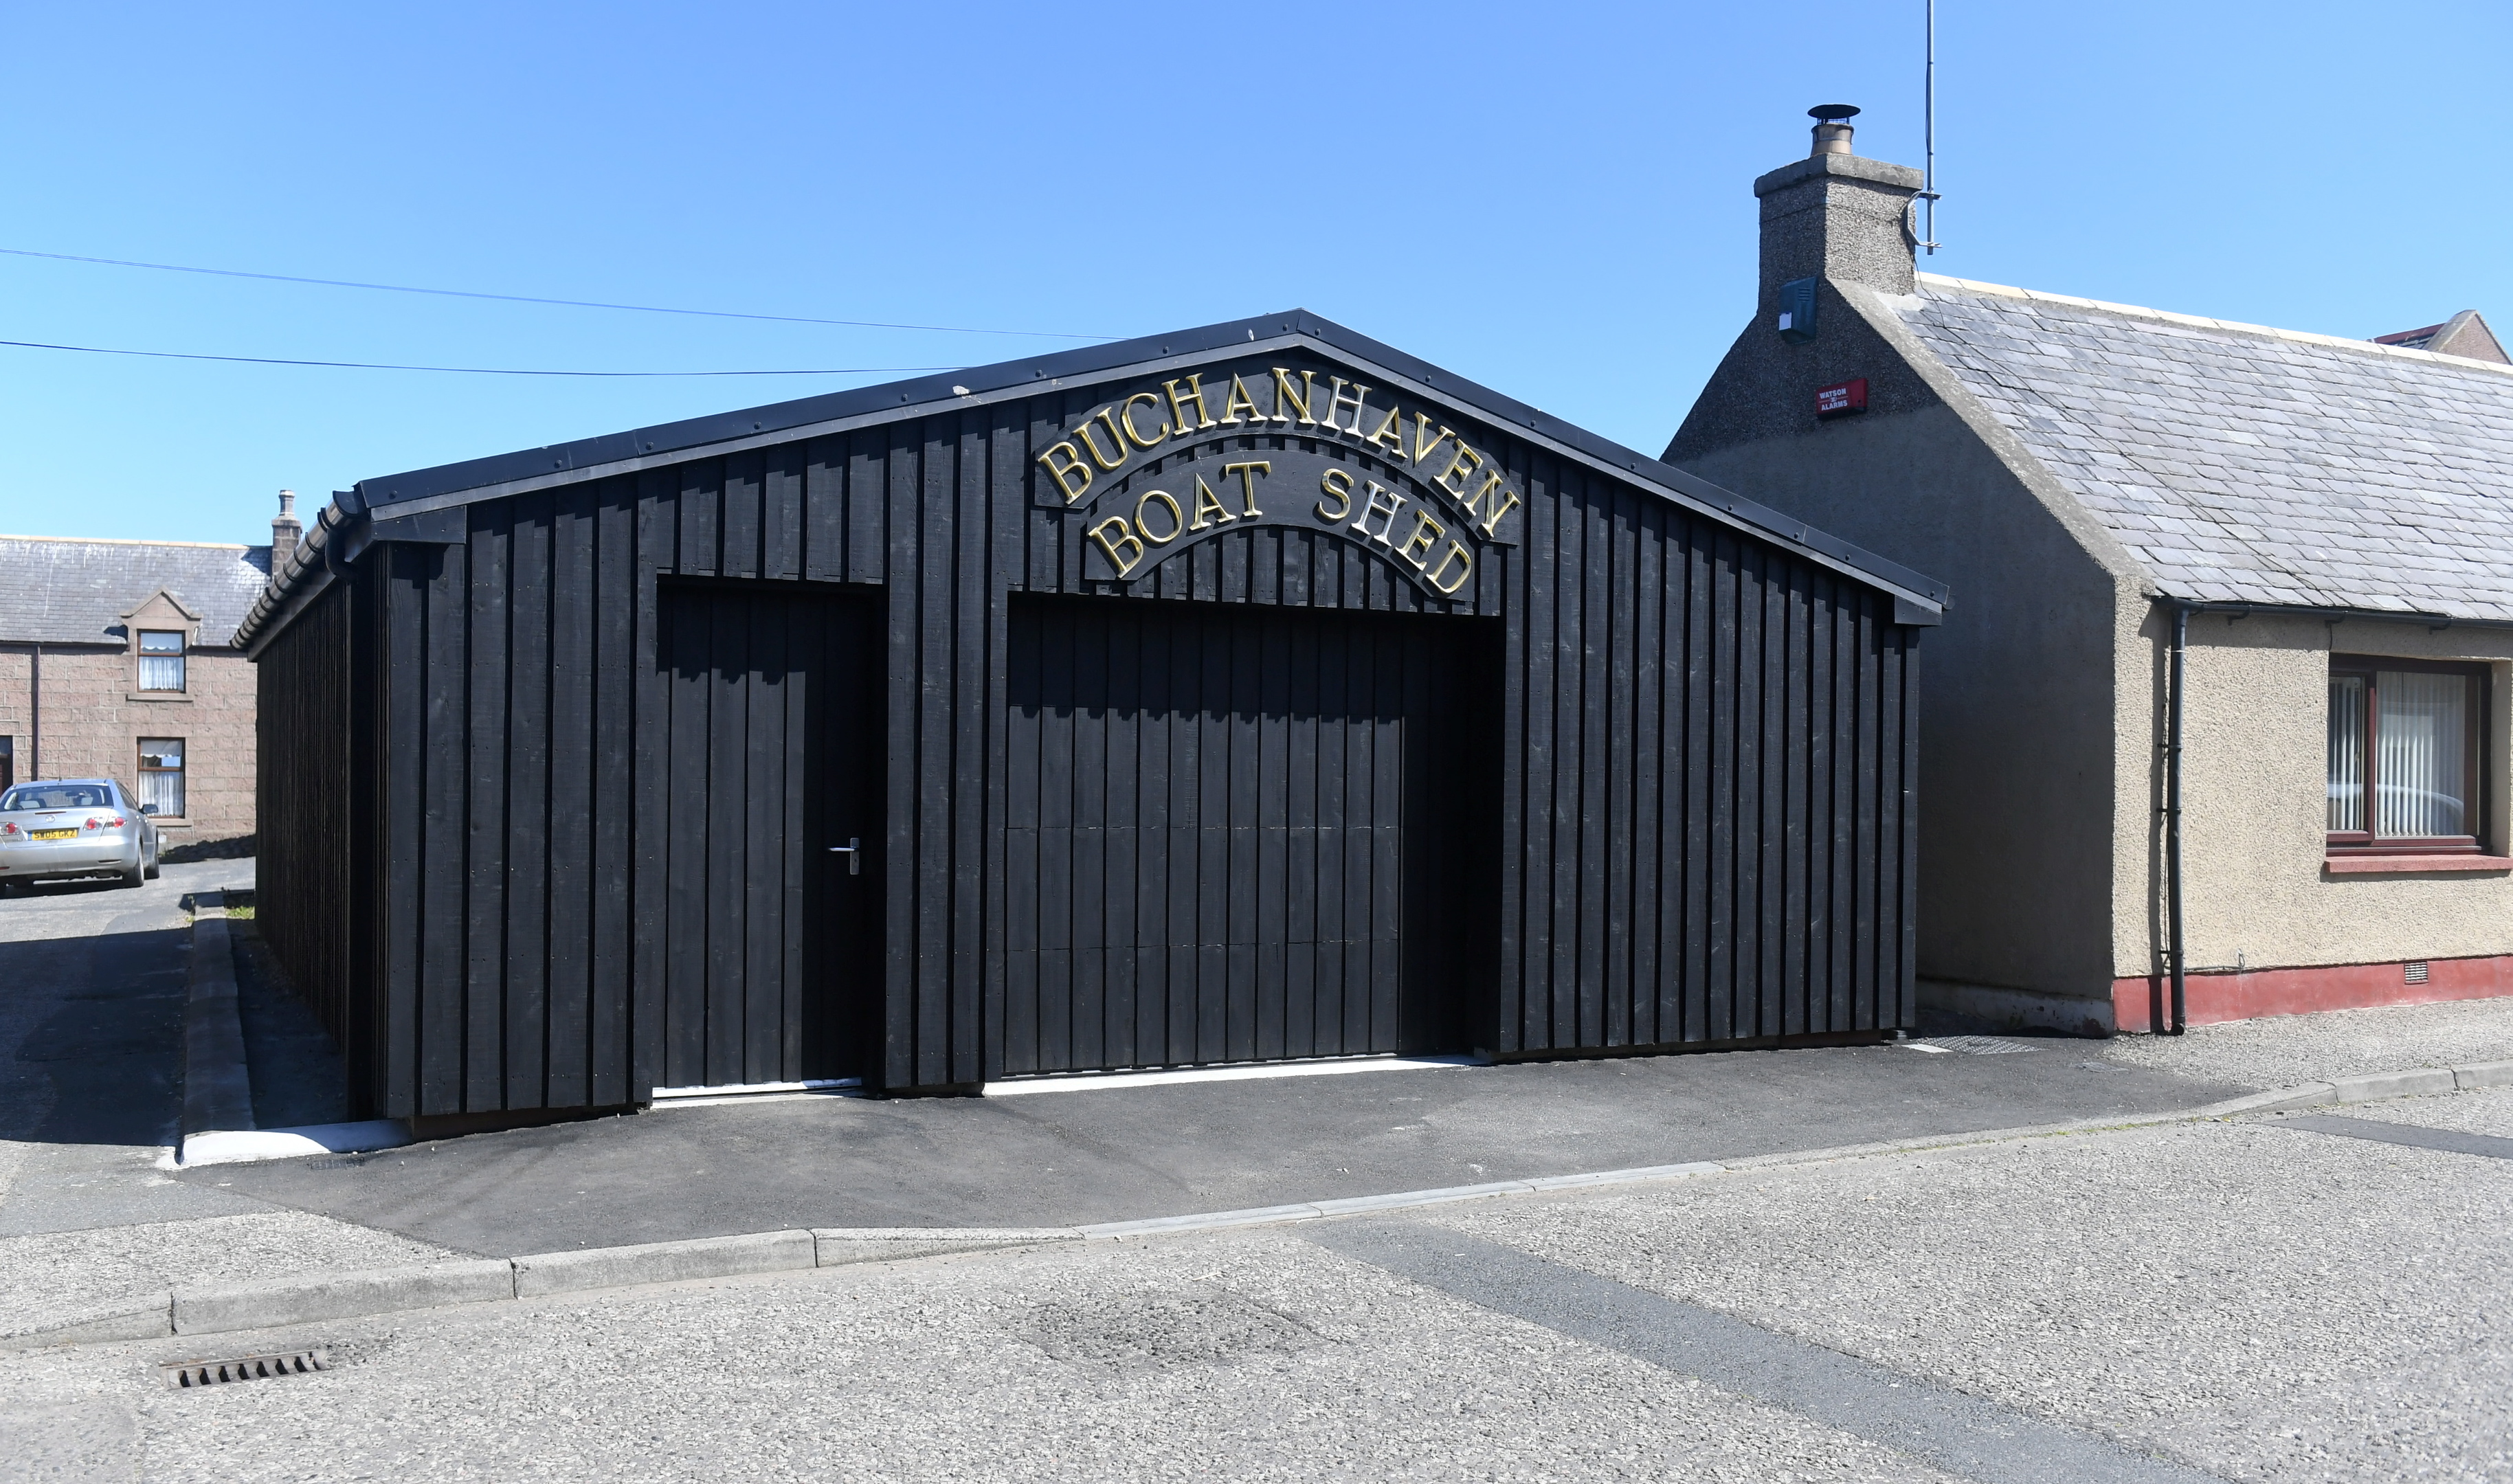 Buchanhaven Boat Shed is going to open on Saturday to the public. Its a new aquarium with locally caught sealife. They are also building a boat in it too as well.
Picture by Chris Sumner